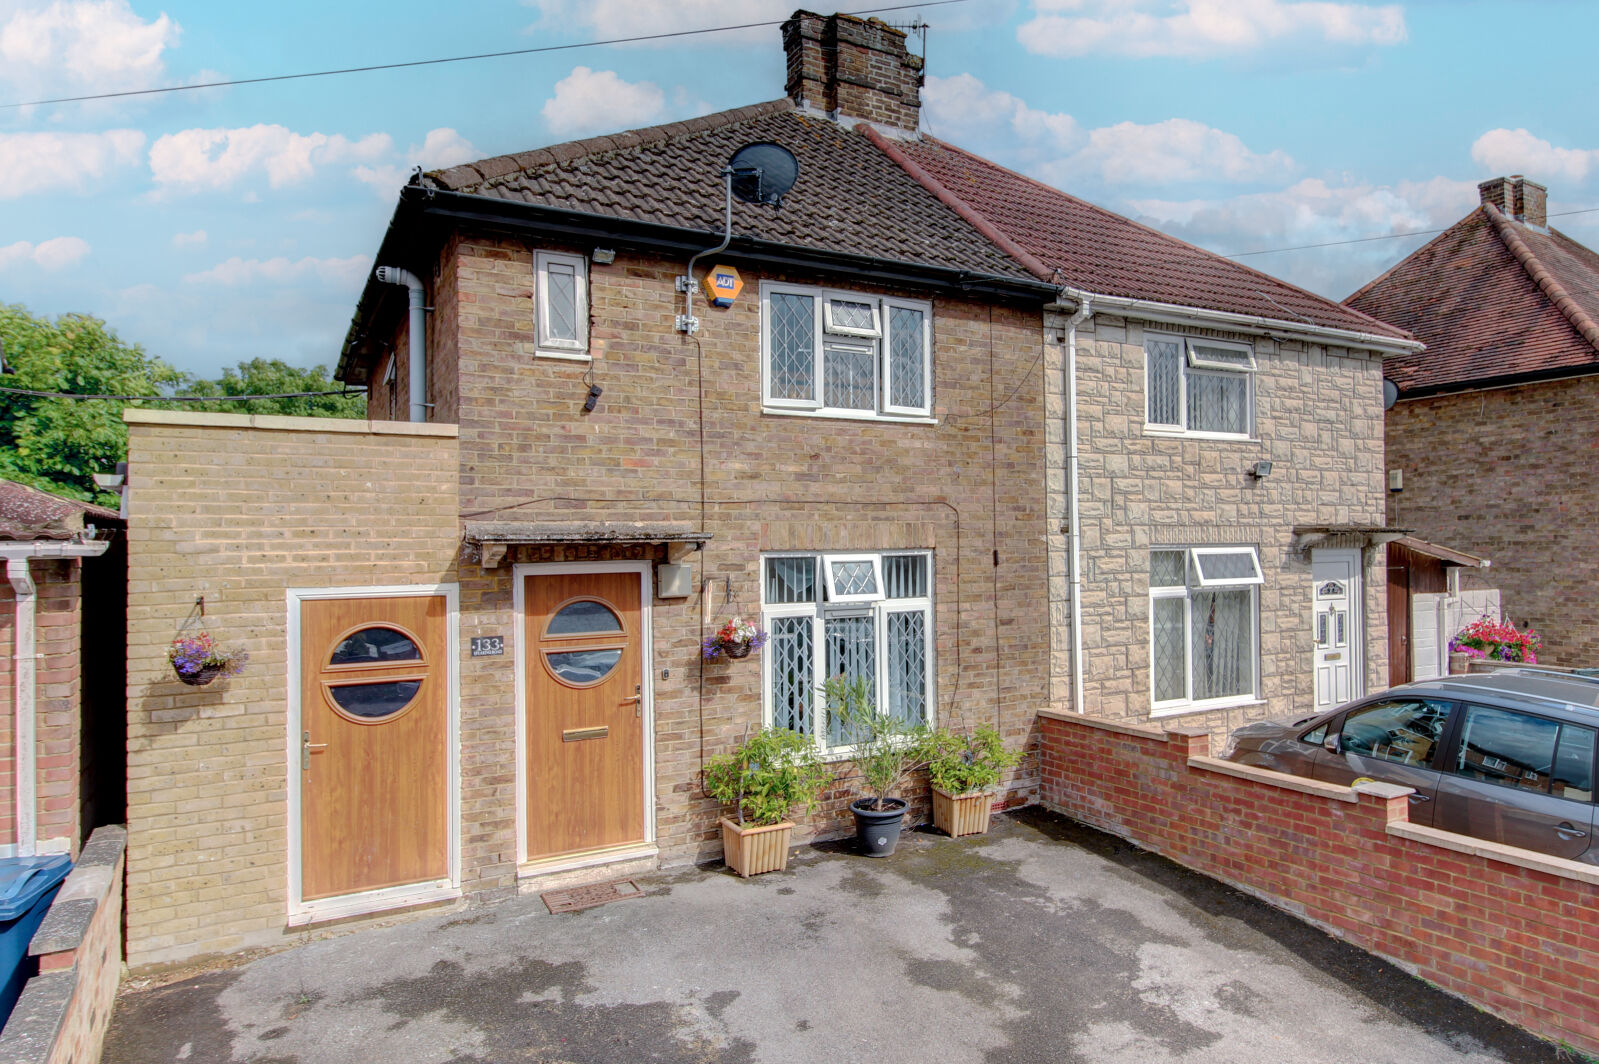 3 bedroom semi detached house for sale Spearing Road, High Wycombe, HP12, main image